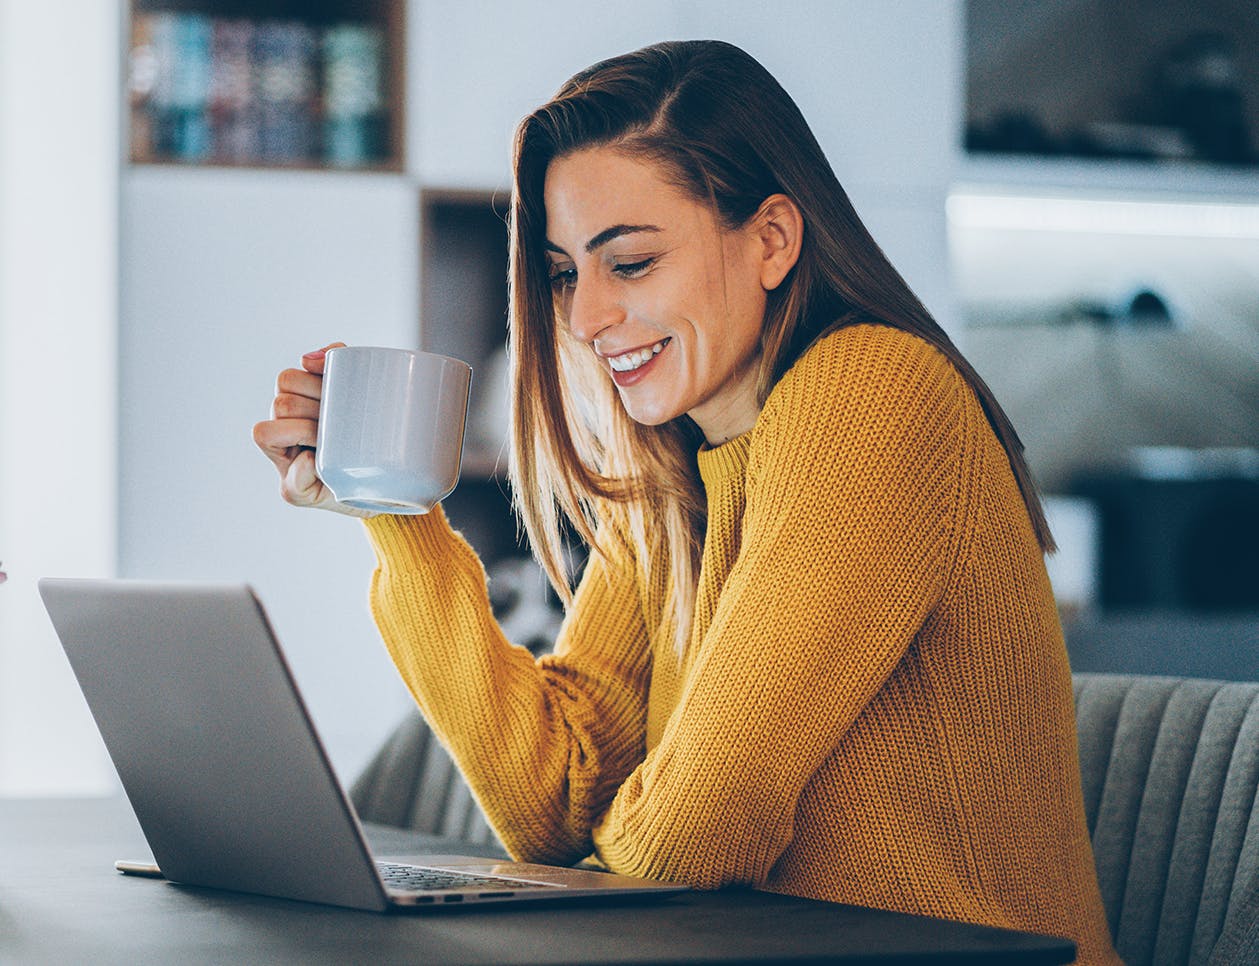 Woman with a coffee mug in her hand looking at her computer